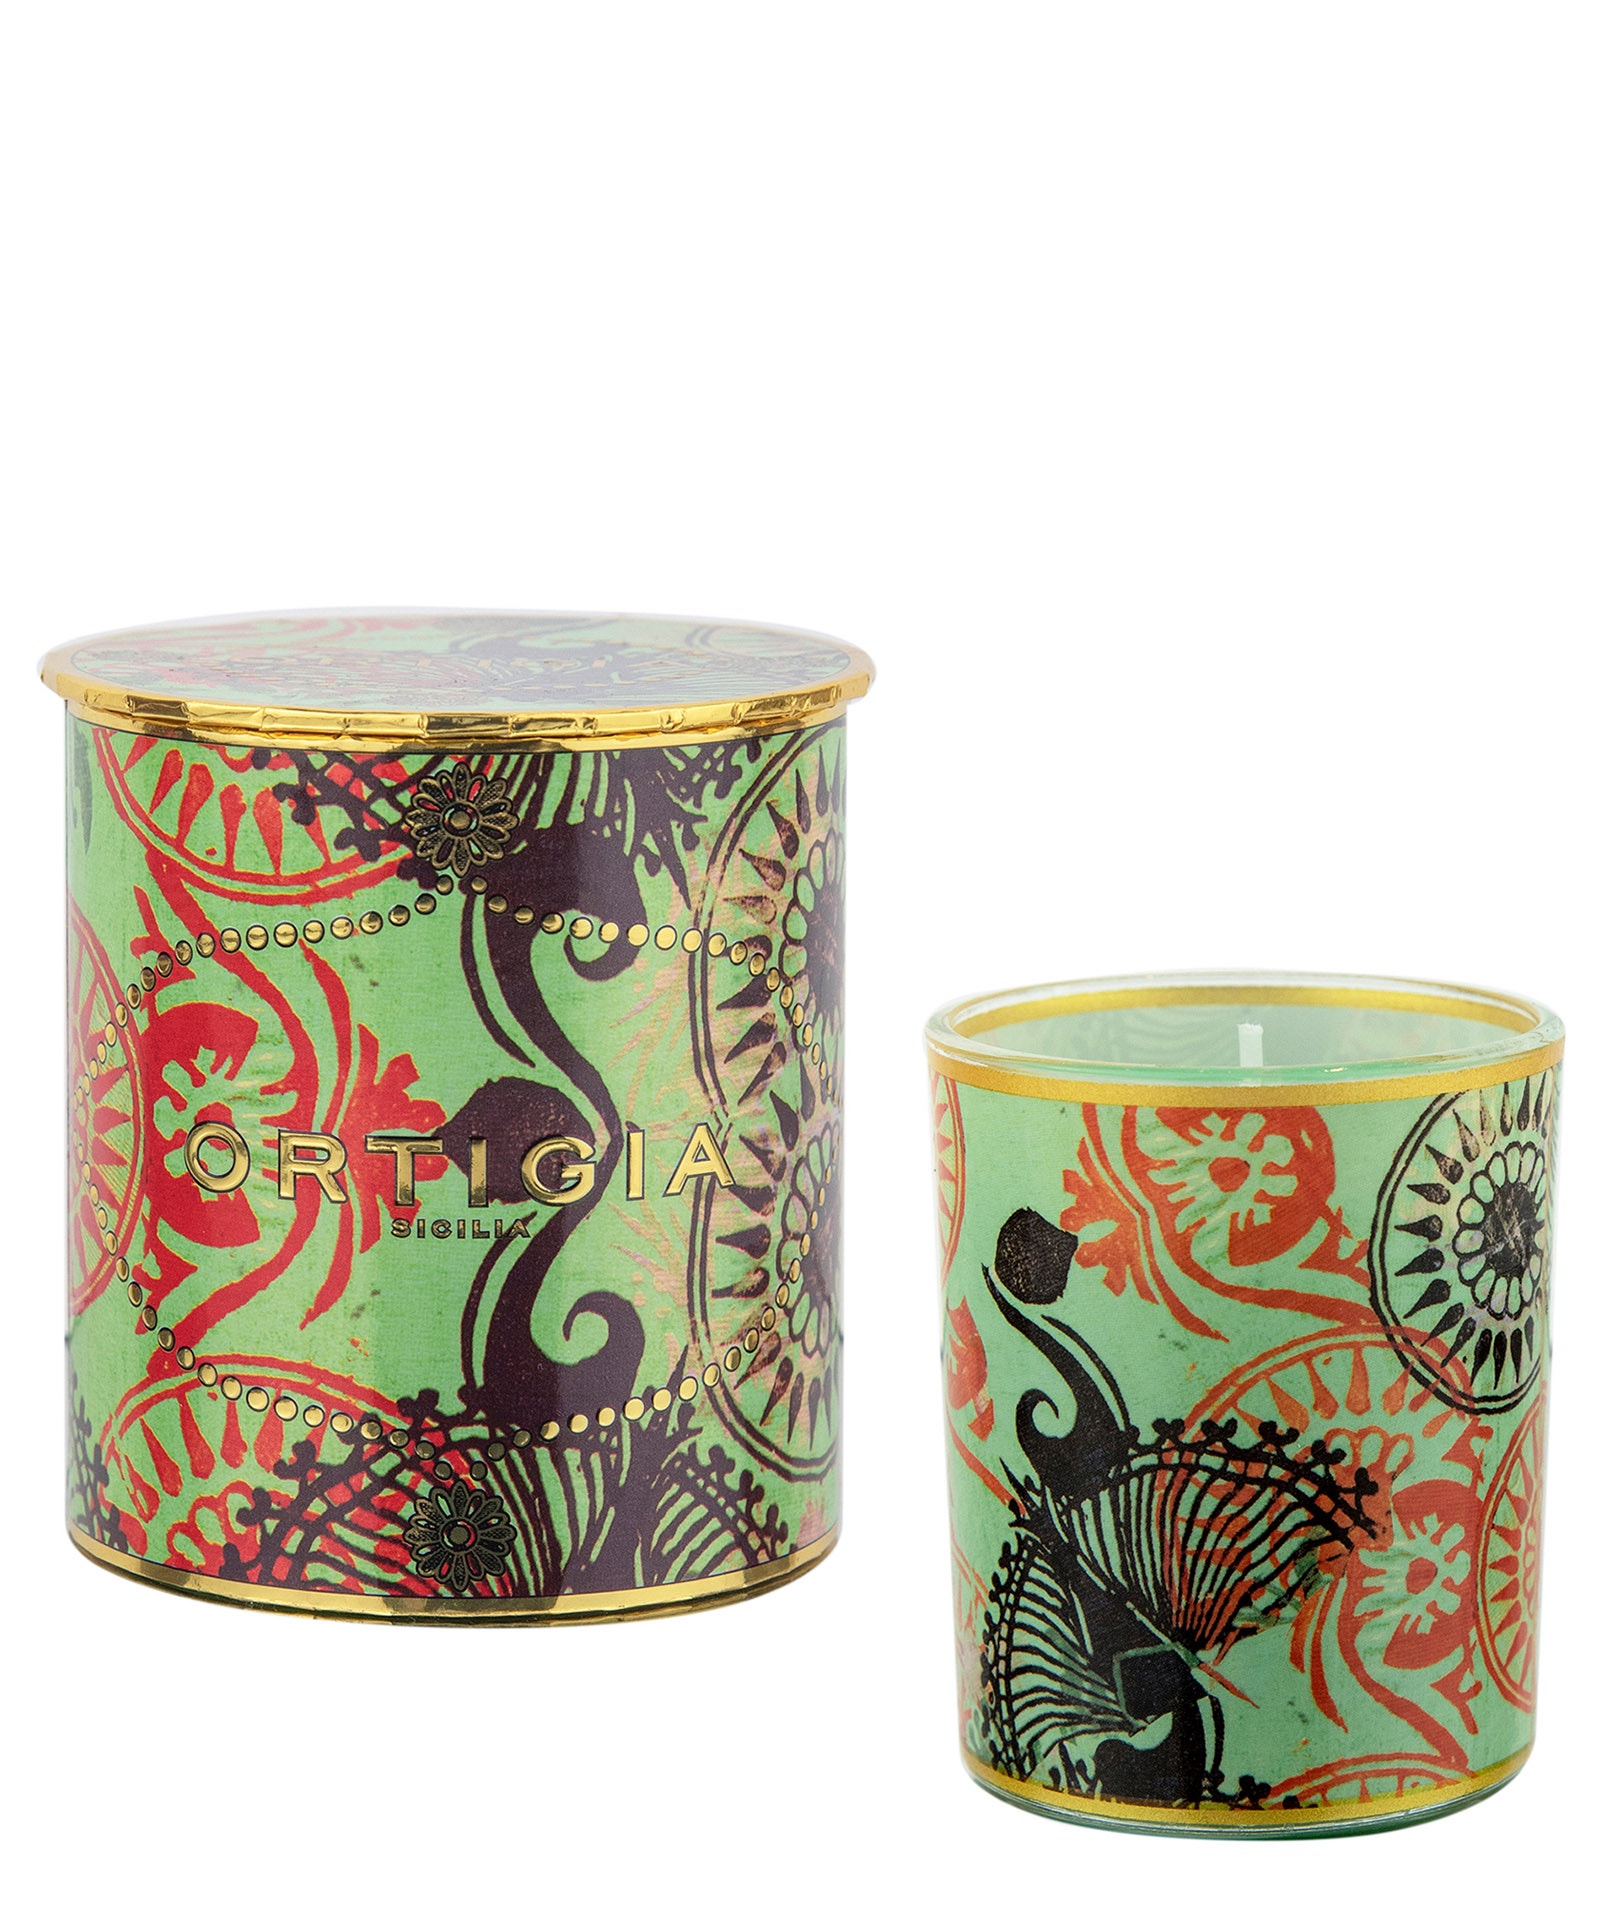 Fico d'iindia decorated candle 150 g